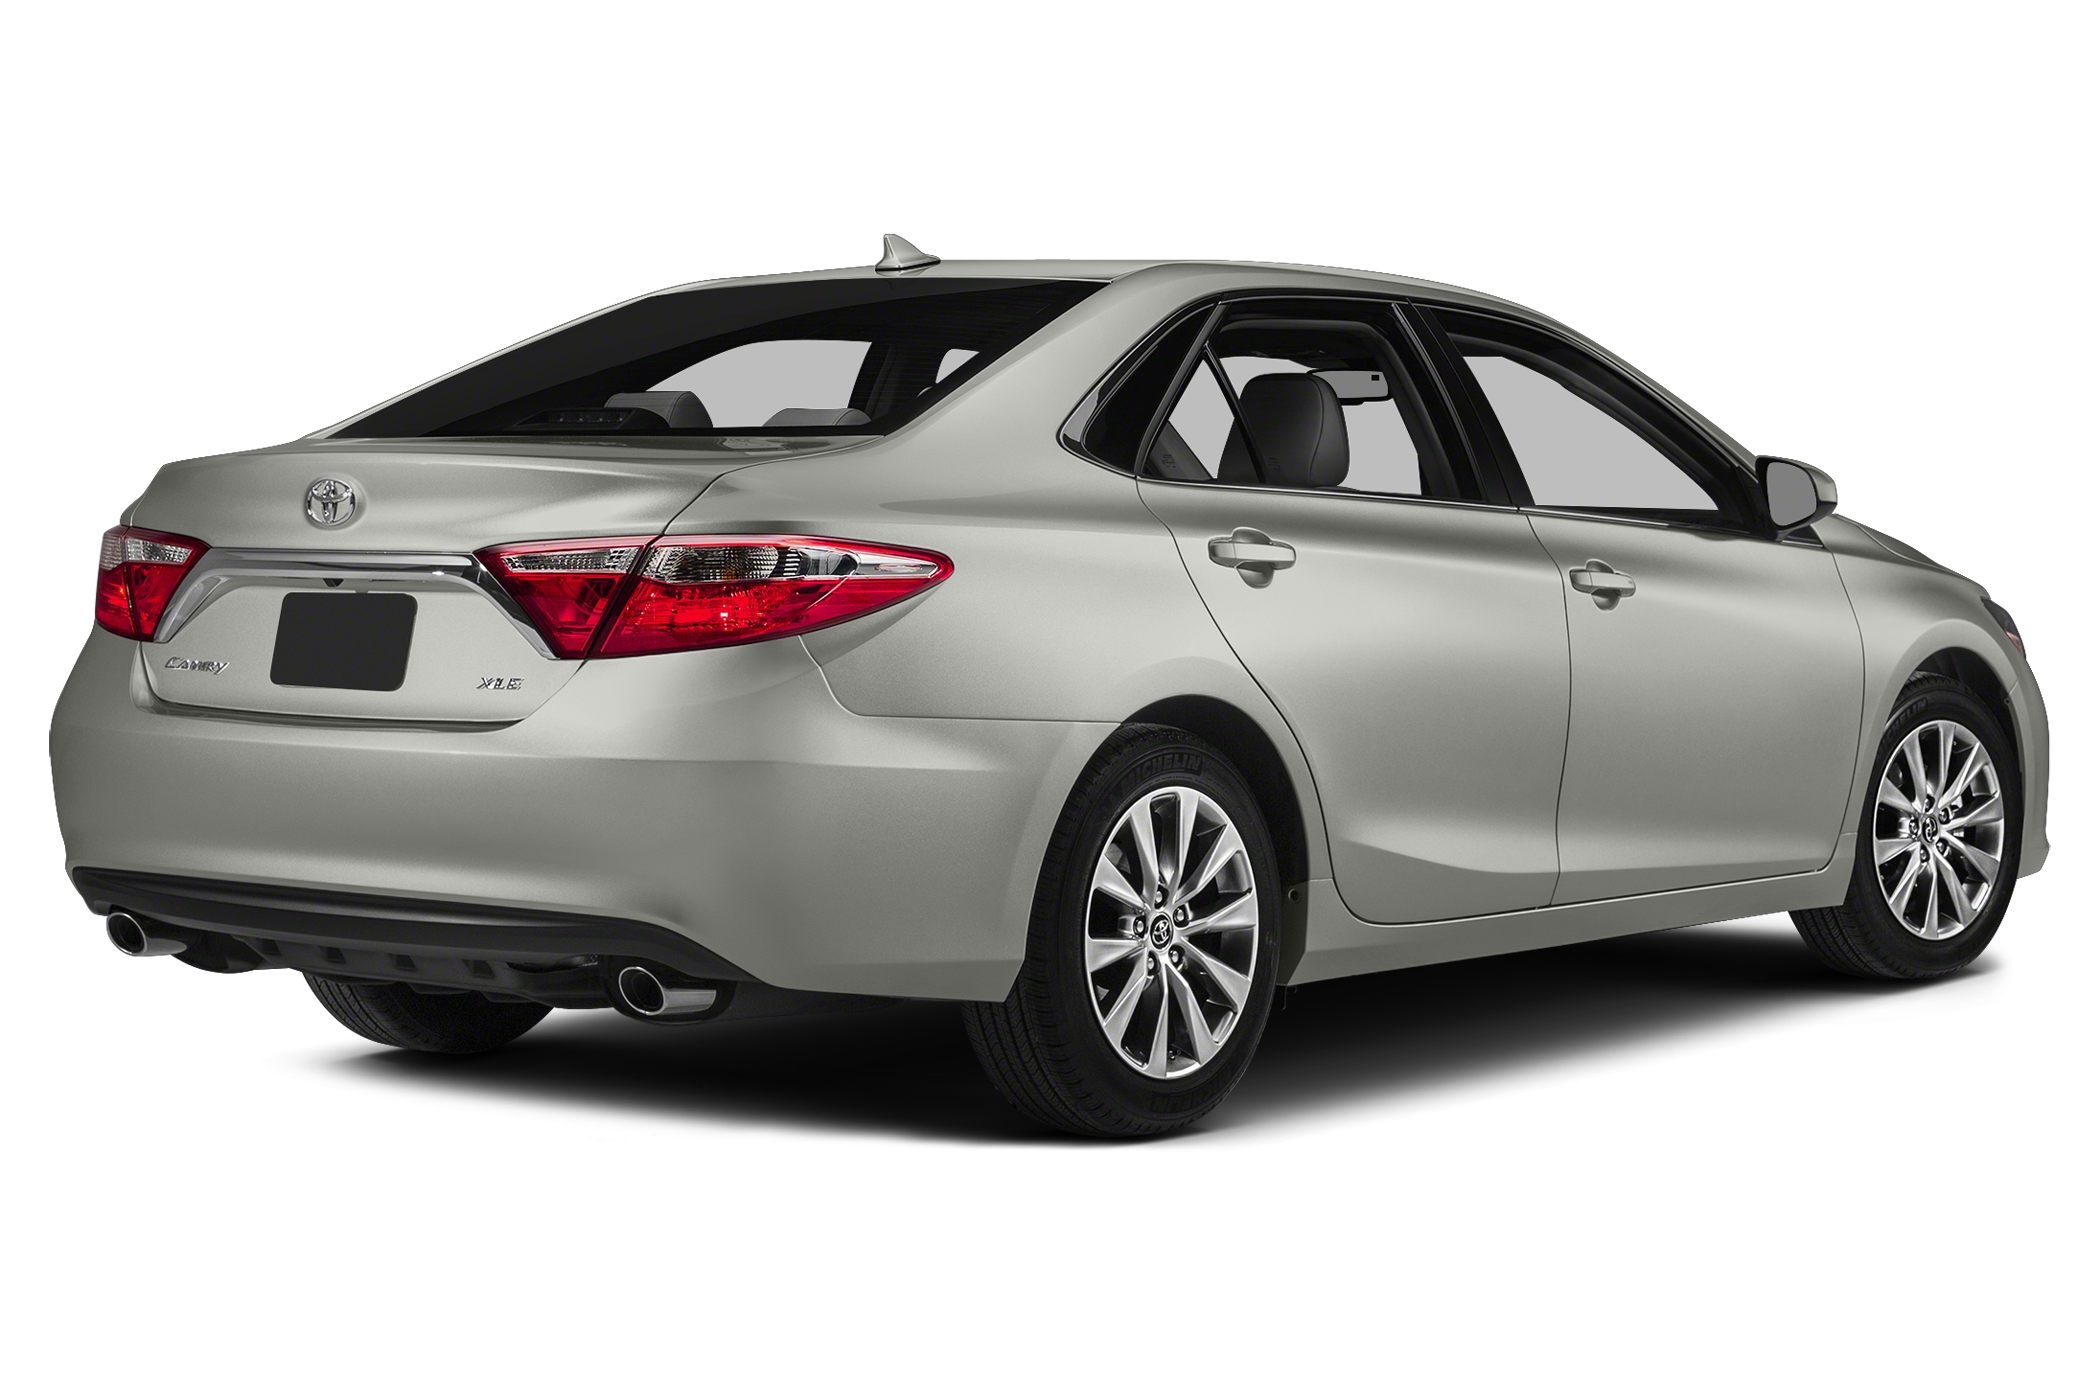 2015 toyota camry price photos reviews amp features 2015 toyota camry invoice price